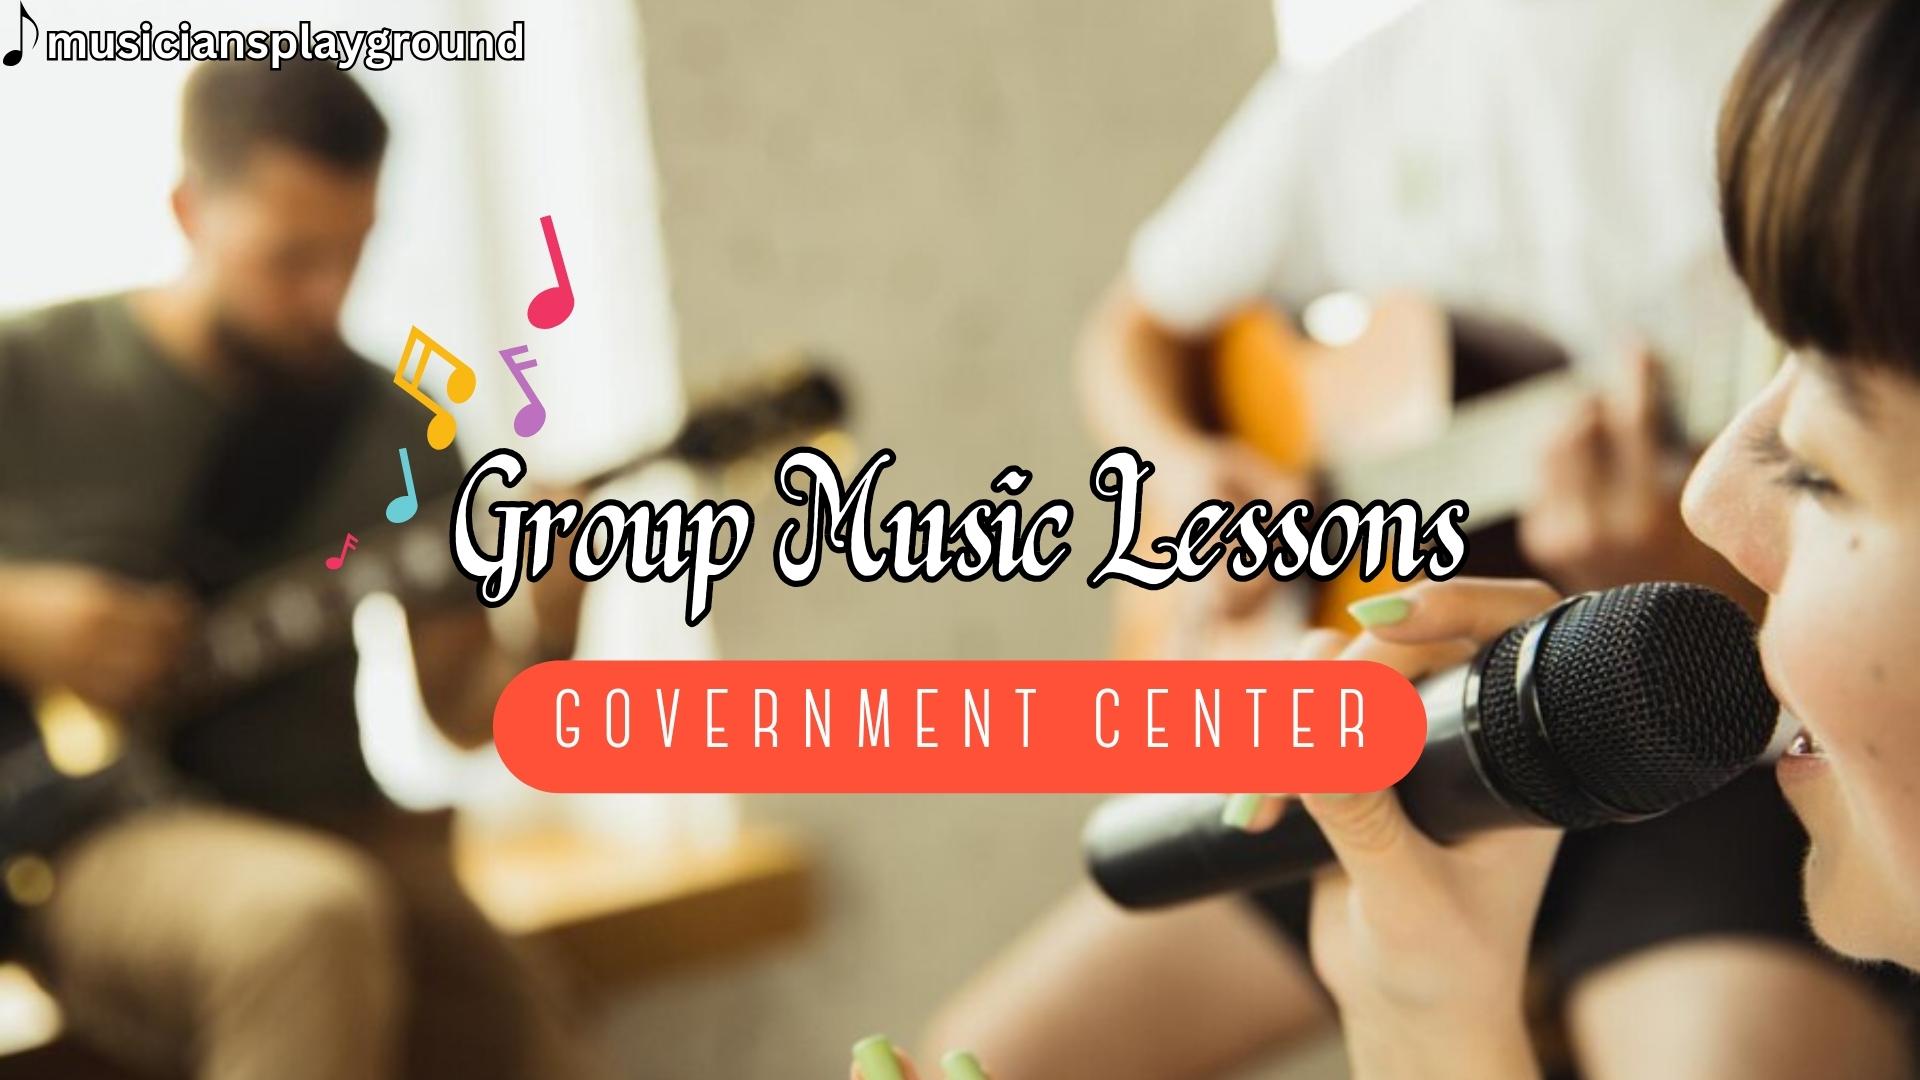 Welcome to Musicians Playground: Group Music Lessons in Government Center, Massachusetts